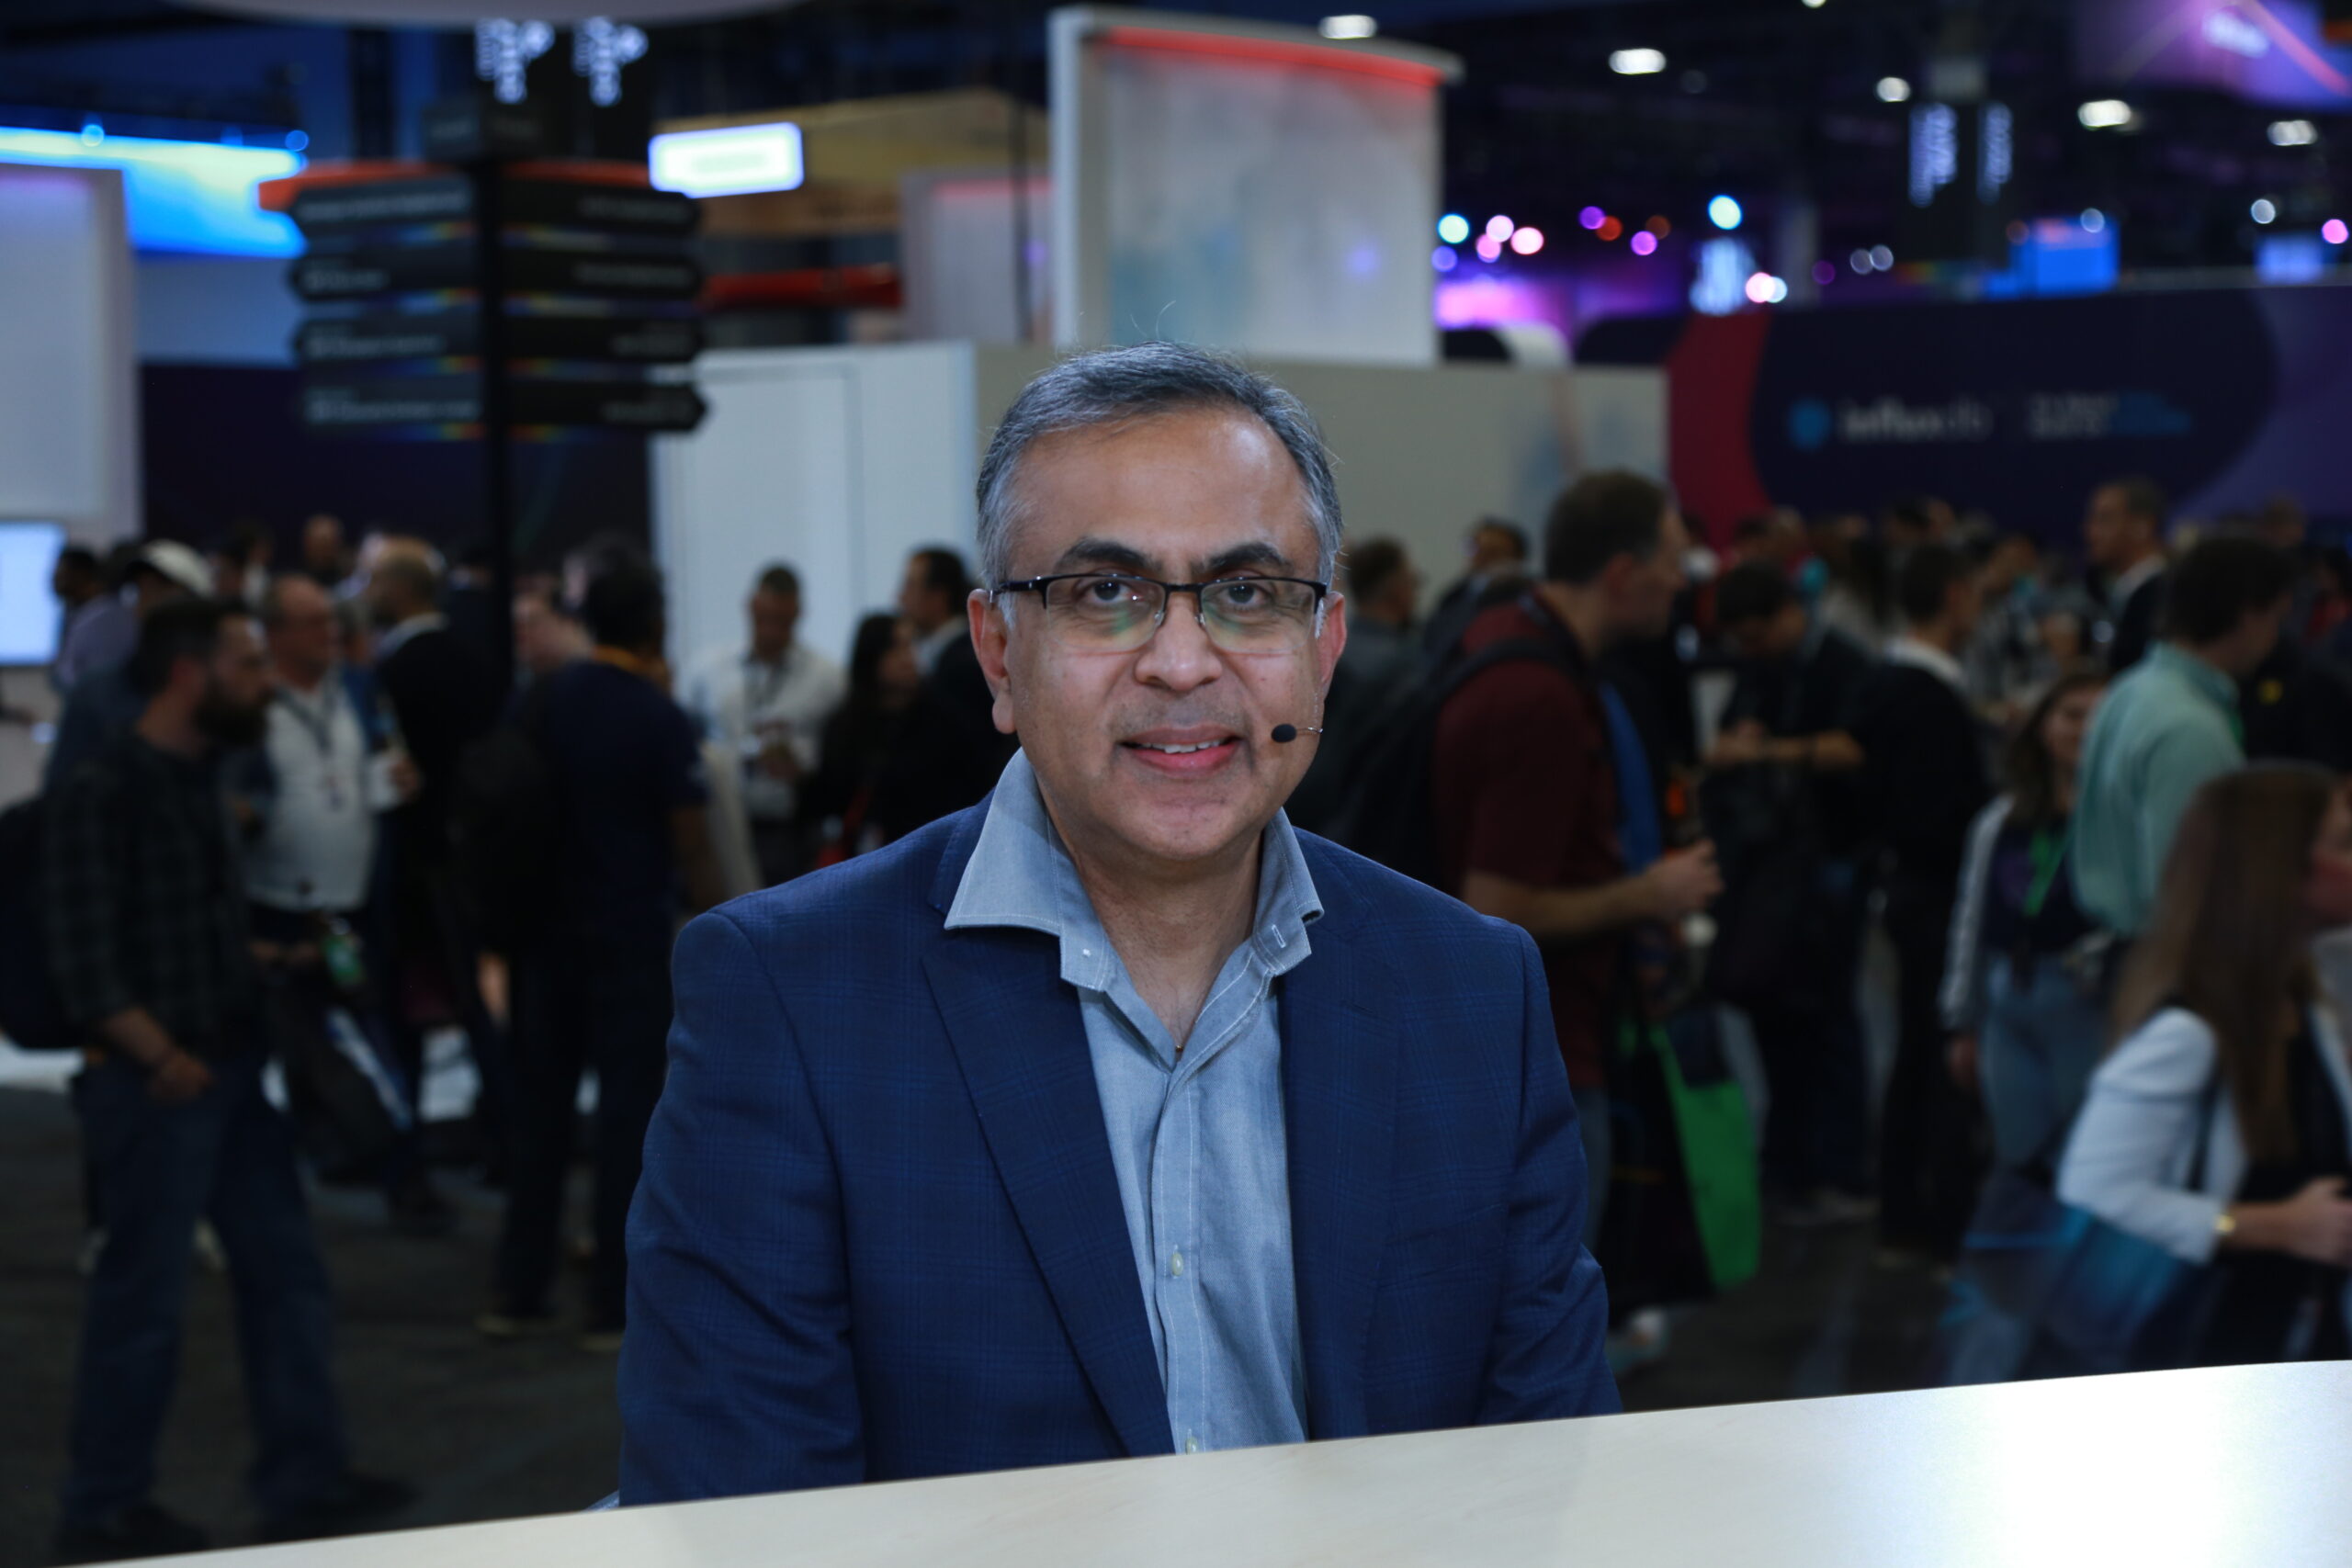 VMware works to improve DevOps experience and make cloud-native Kubernetes consumable